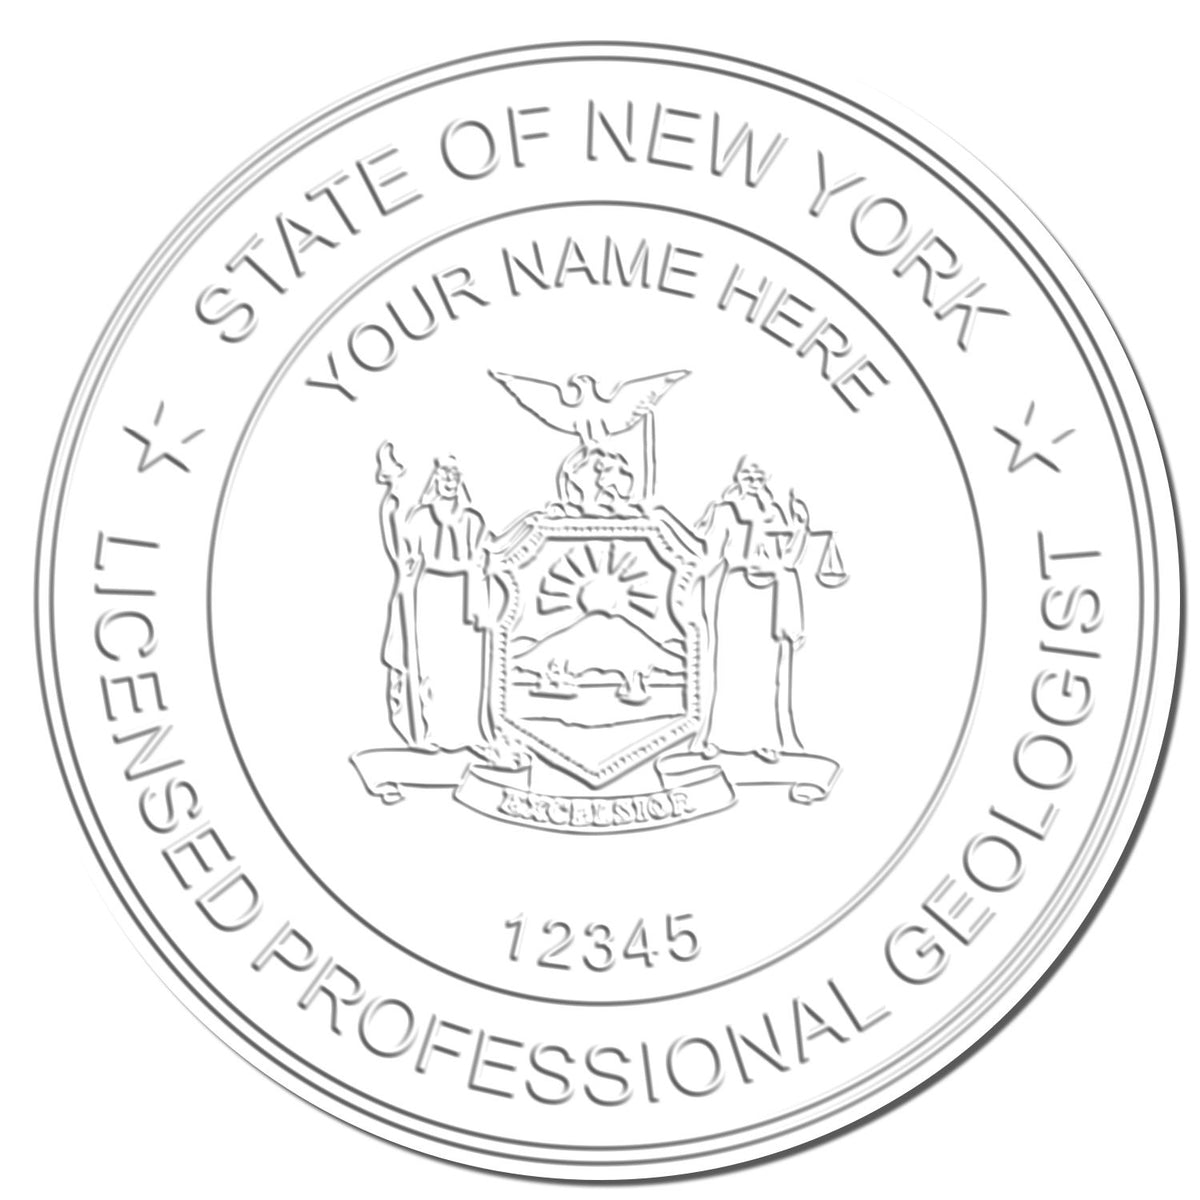 A stamped imprint of the Soft New York Professional Geologist Seal in this stylish lifestyle photo, setting the tone for a unique and personalized product.